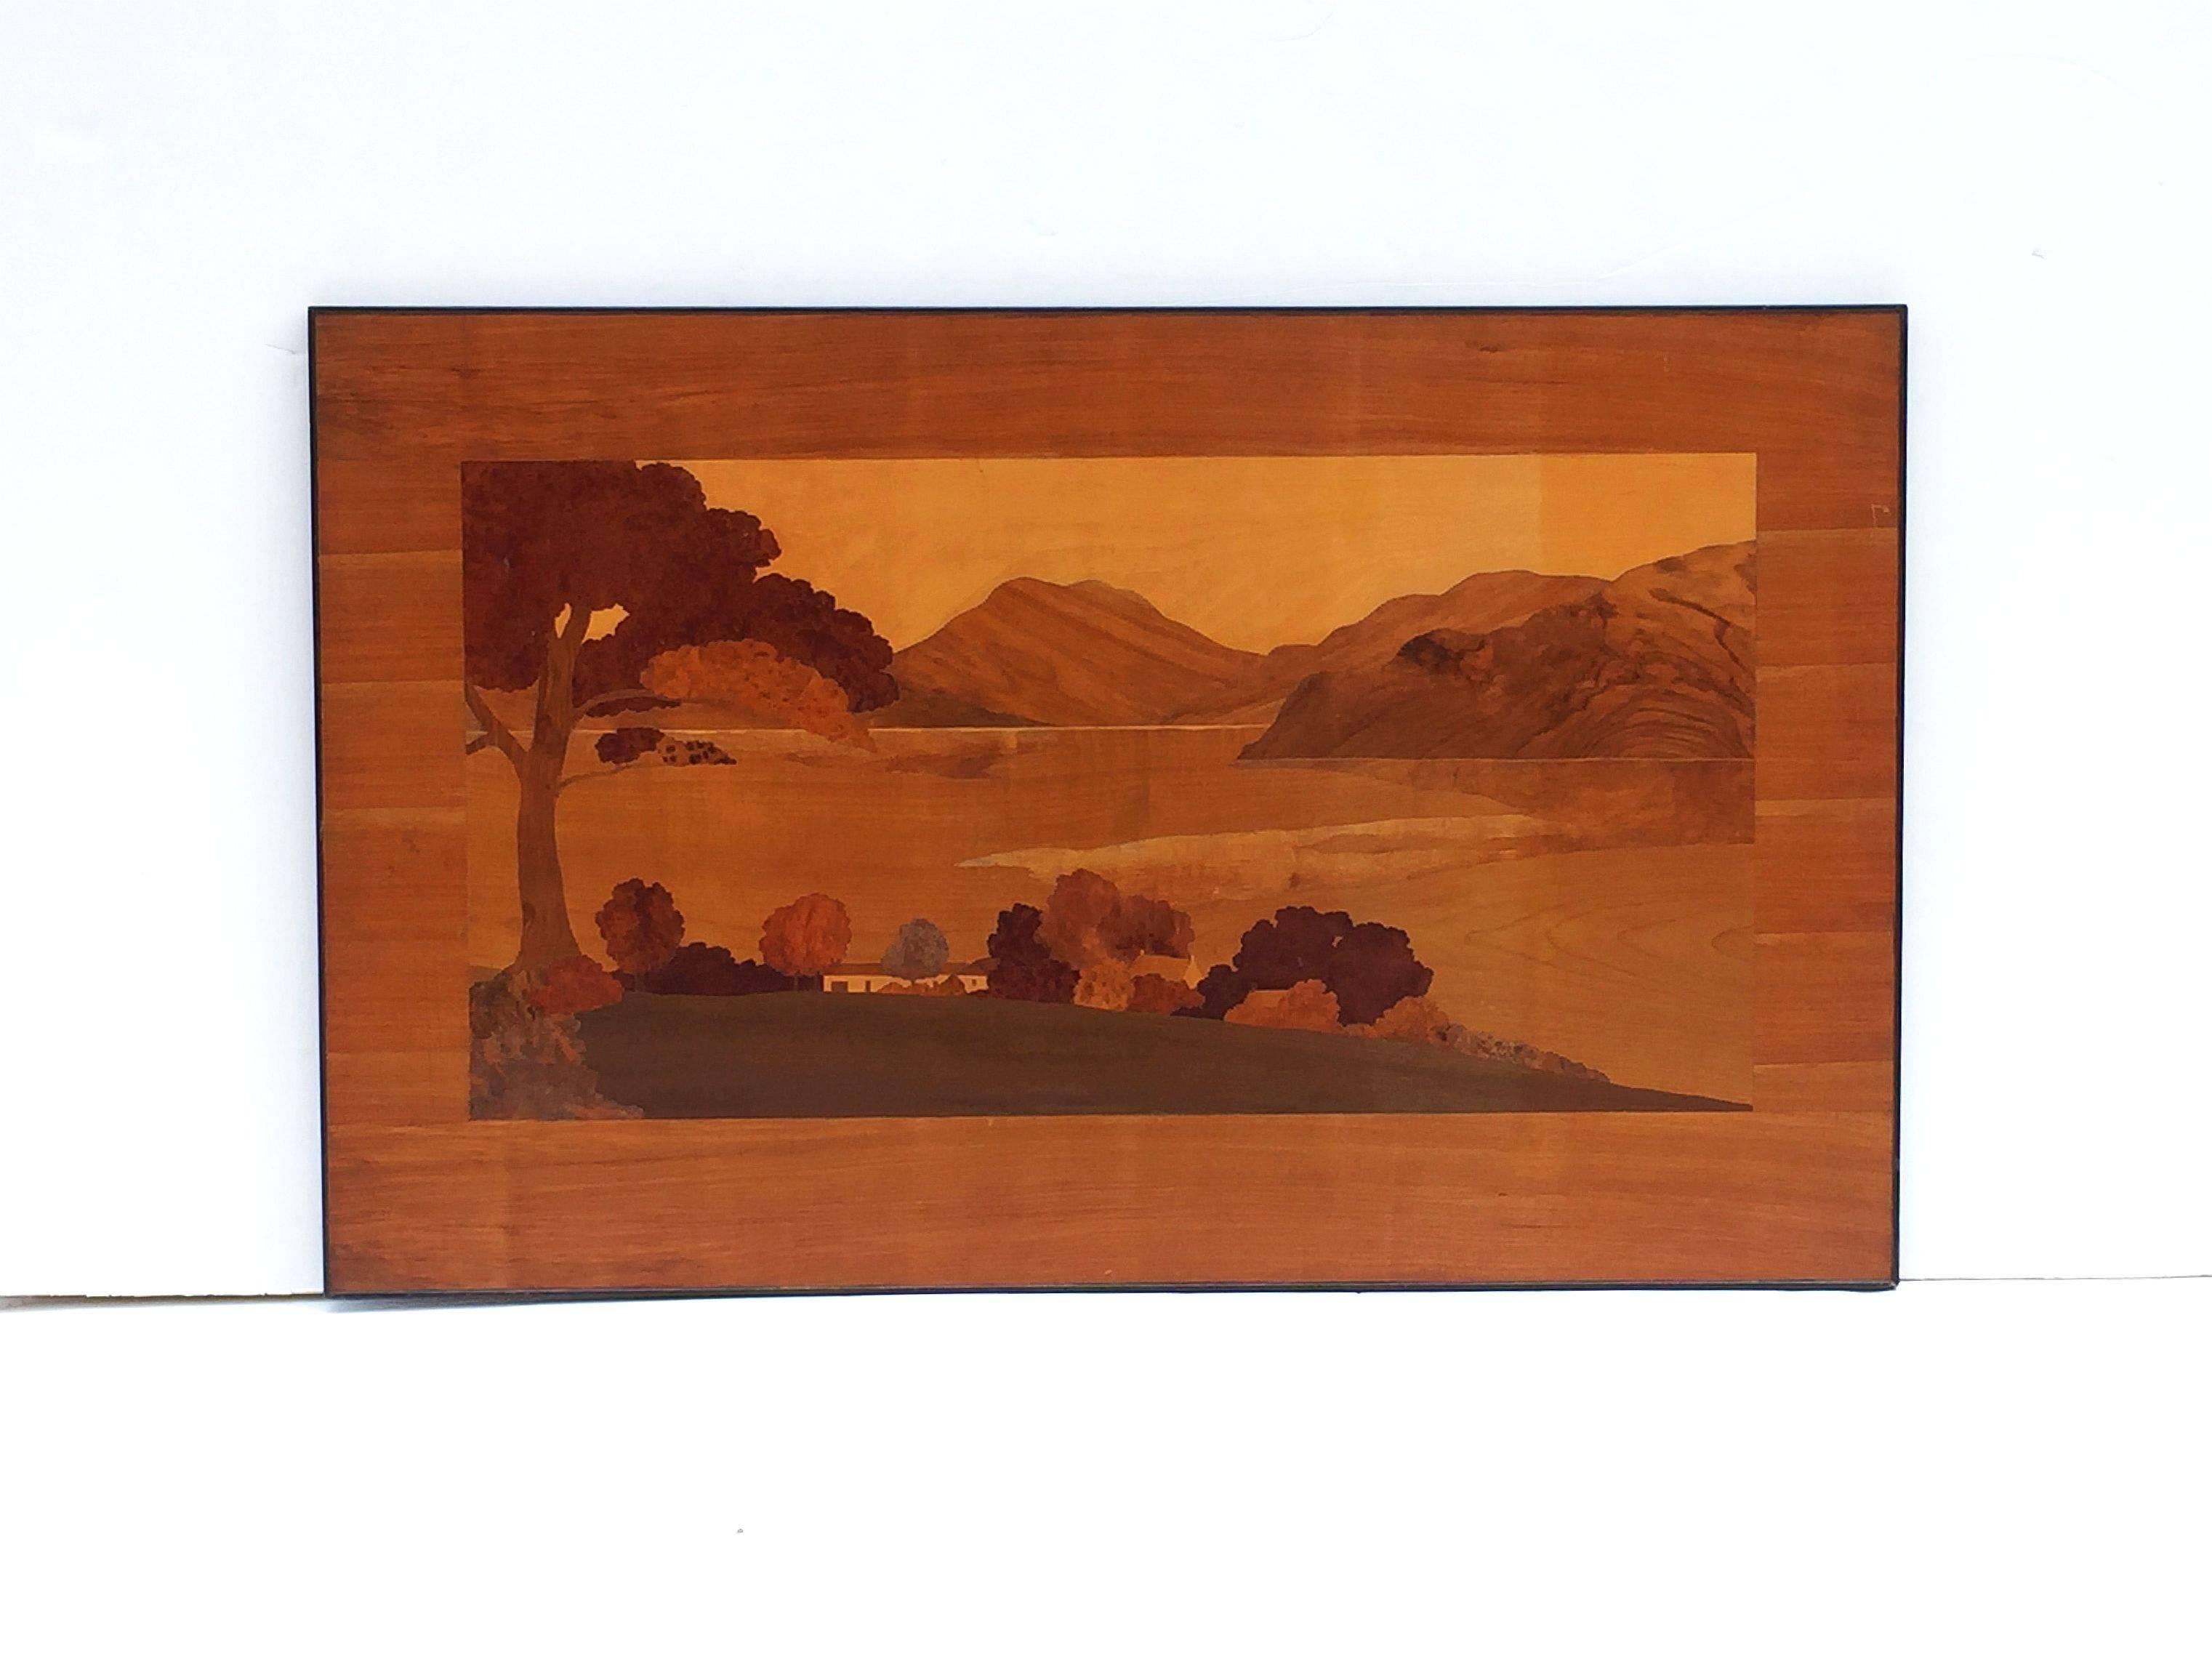 A large Scottish marquetry panel, circa 1920s-1930s, in the manner of Rowley Gallery, inlaid with view of Loch Fyne, Argyll, Scotland.

Featuring finely patinated inlaid woods bound in a black metal frame.

Dimensions are: H 31 1/2